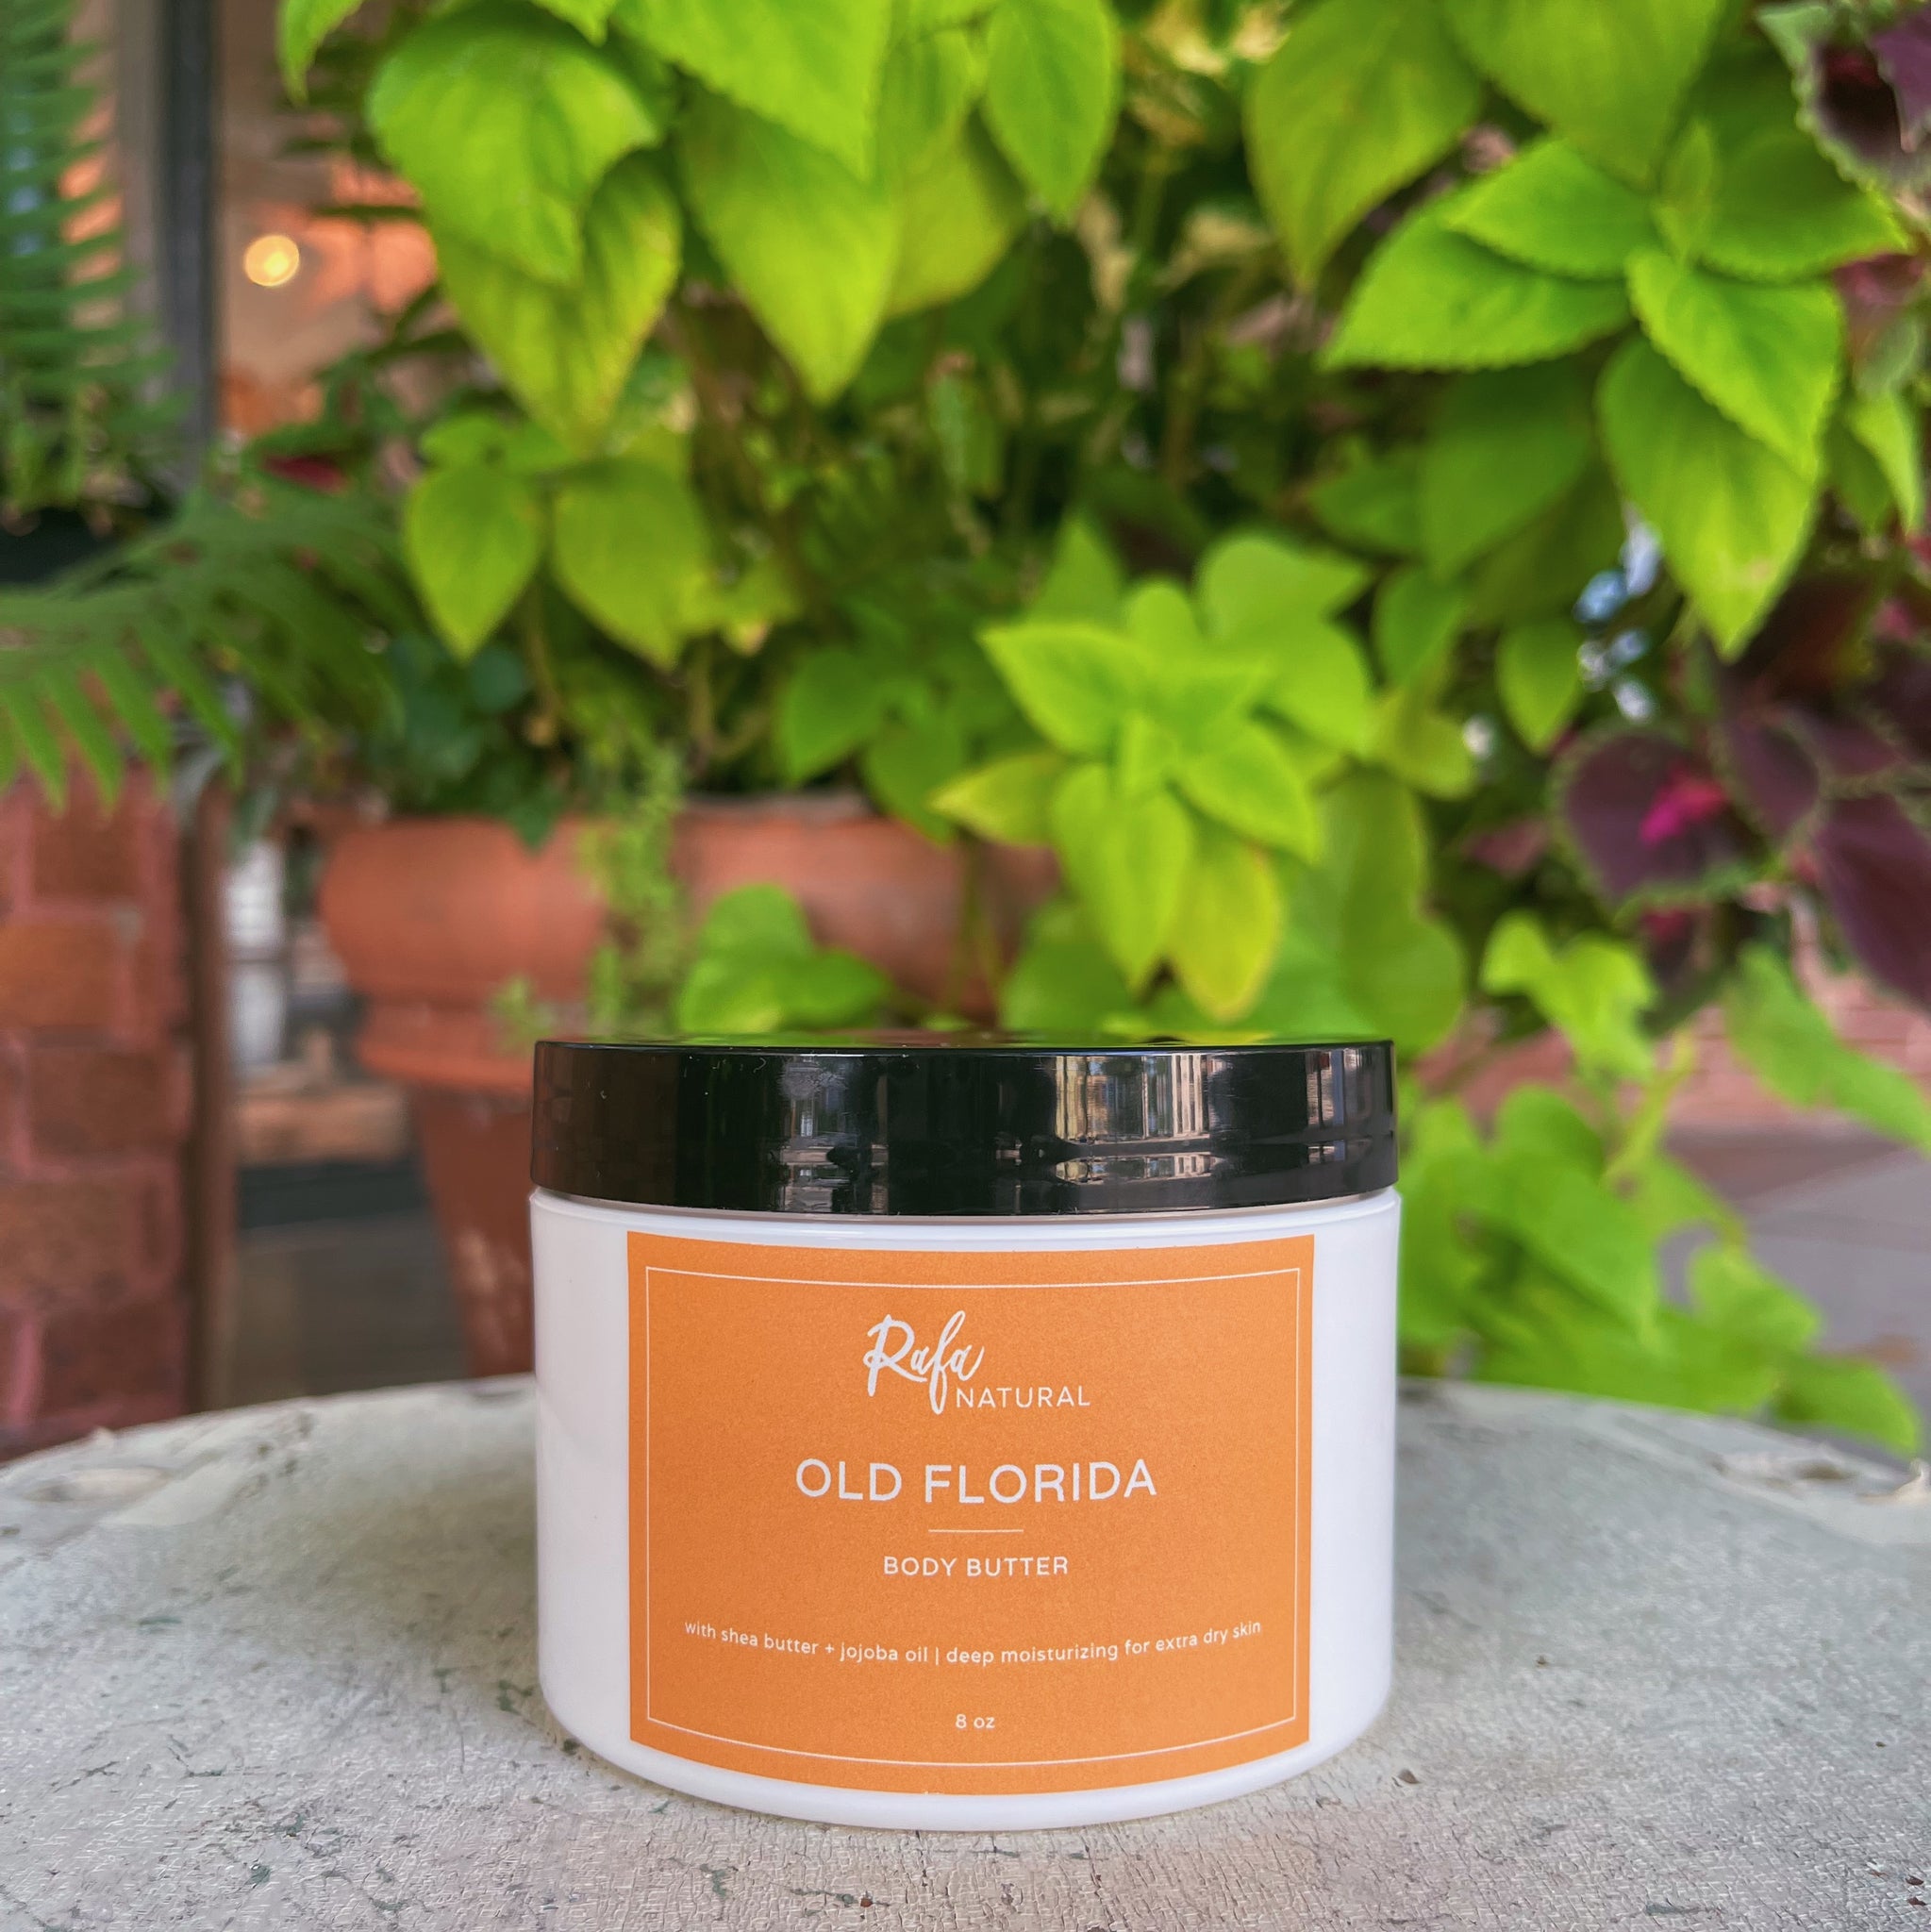 8oz. Old Florida Body Butter by Rafa Natural 